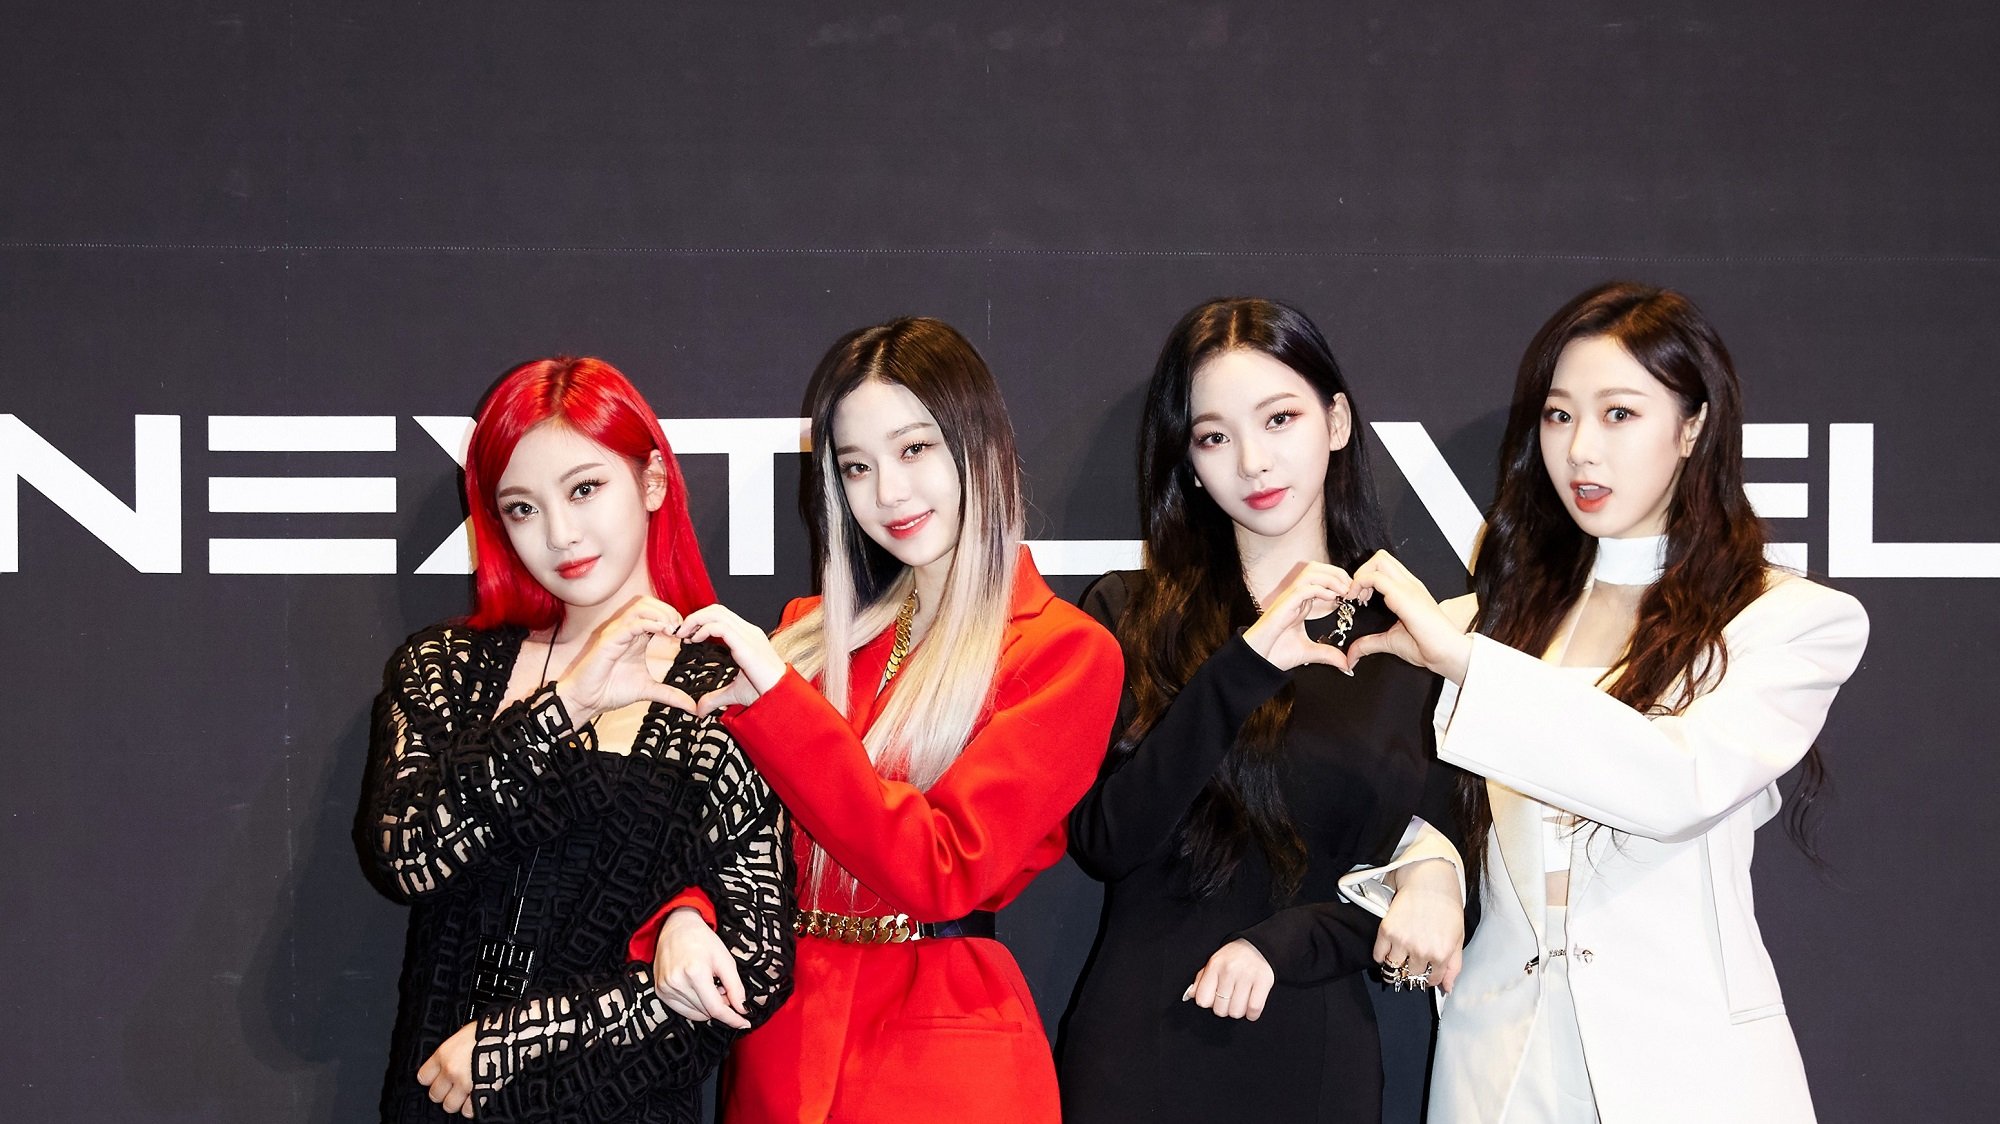 The members of aespa pose at a press conference for the K-pop group's single 'Next Level'